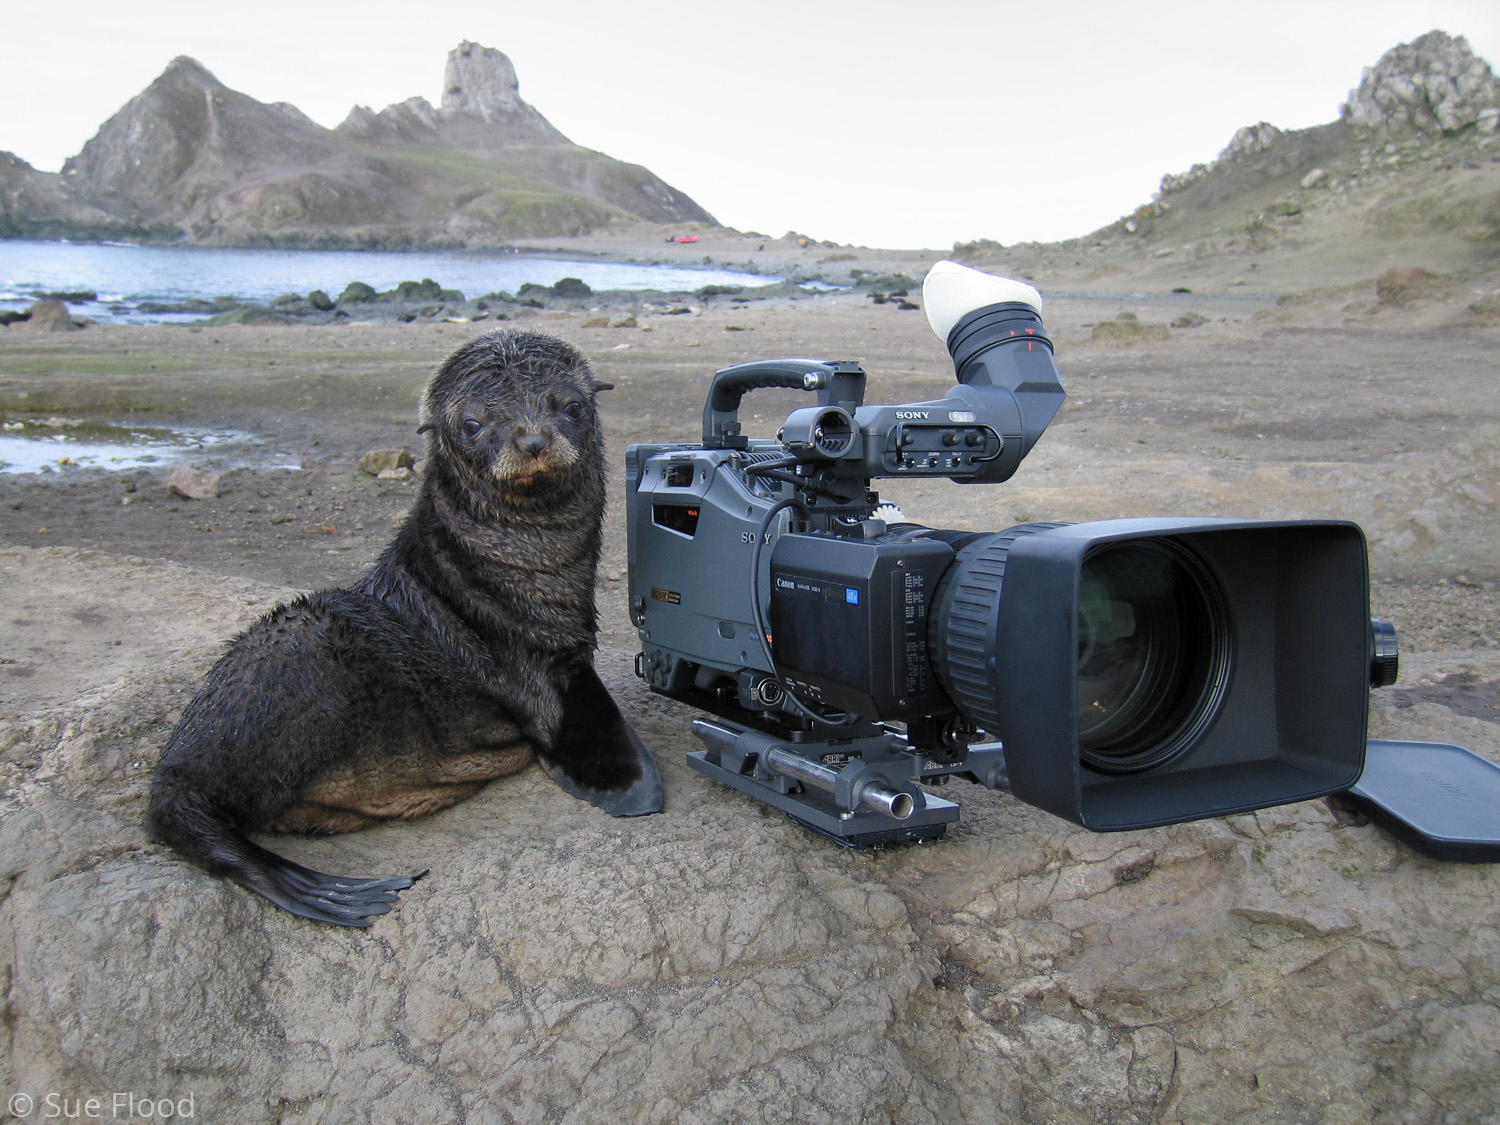 Fur seal pup with video camera during filming of Planet Earth, South Shetland Islands